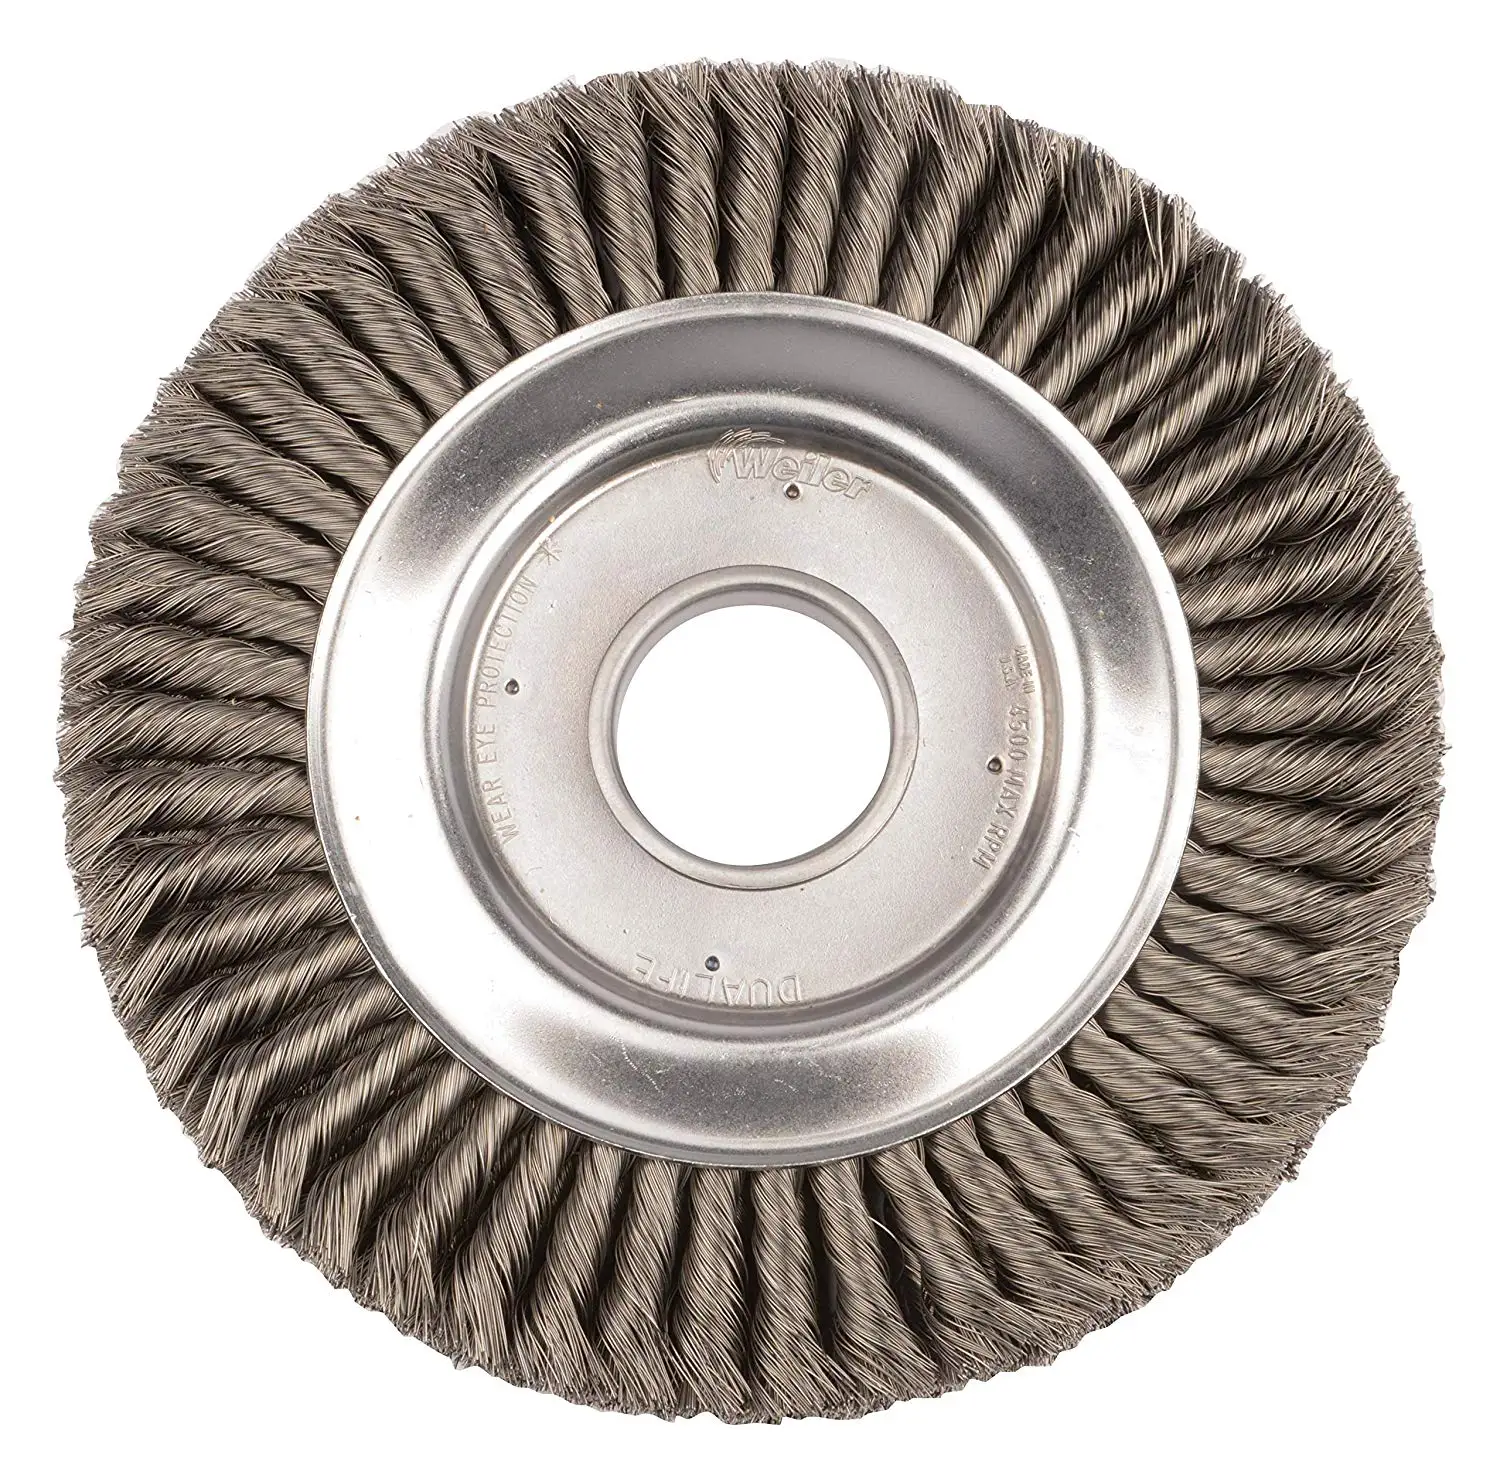 Twisted Stainless Steel Wire Wheel Brush with Round Holel from PEXCRAFT